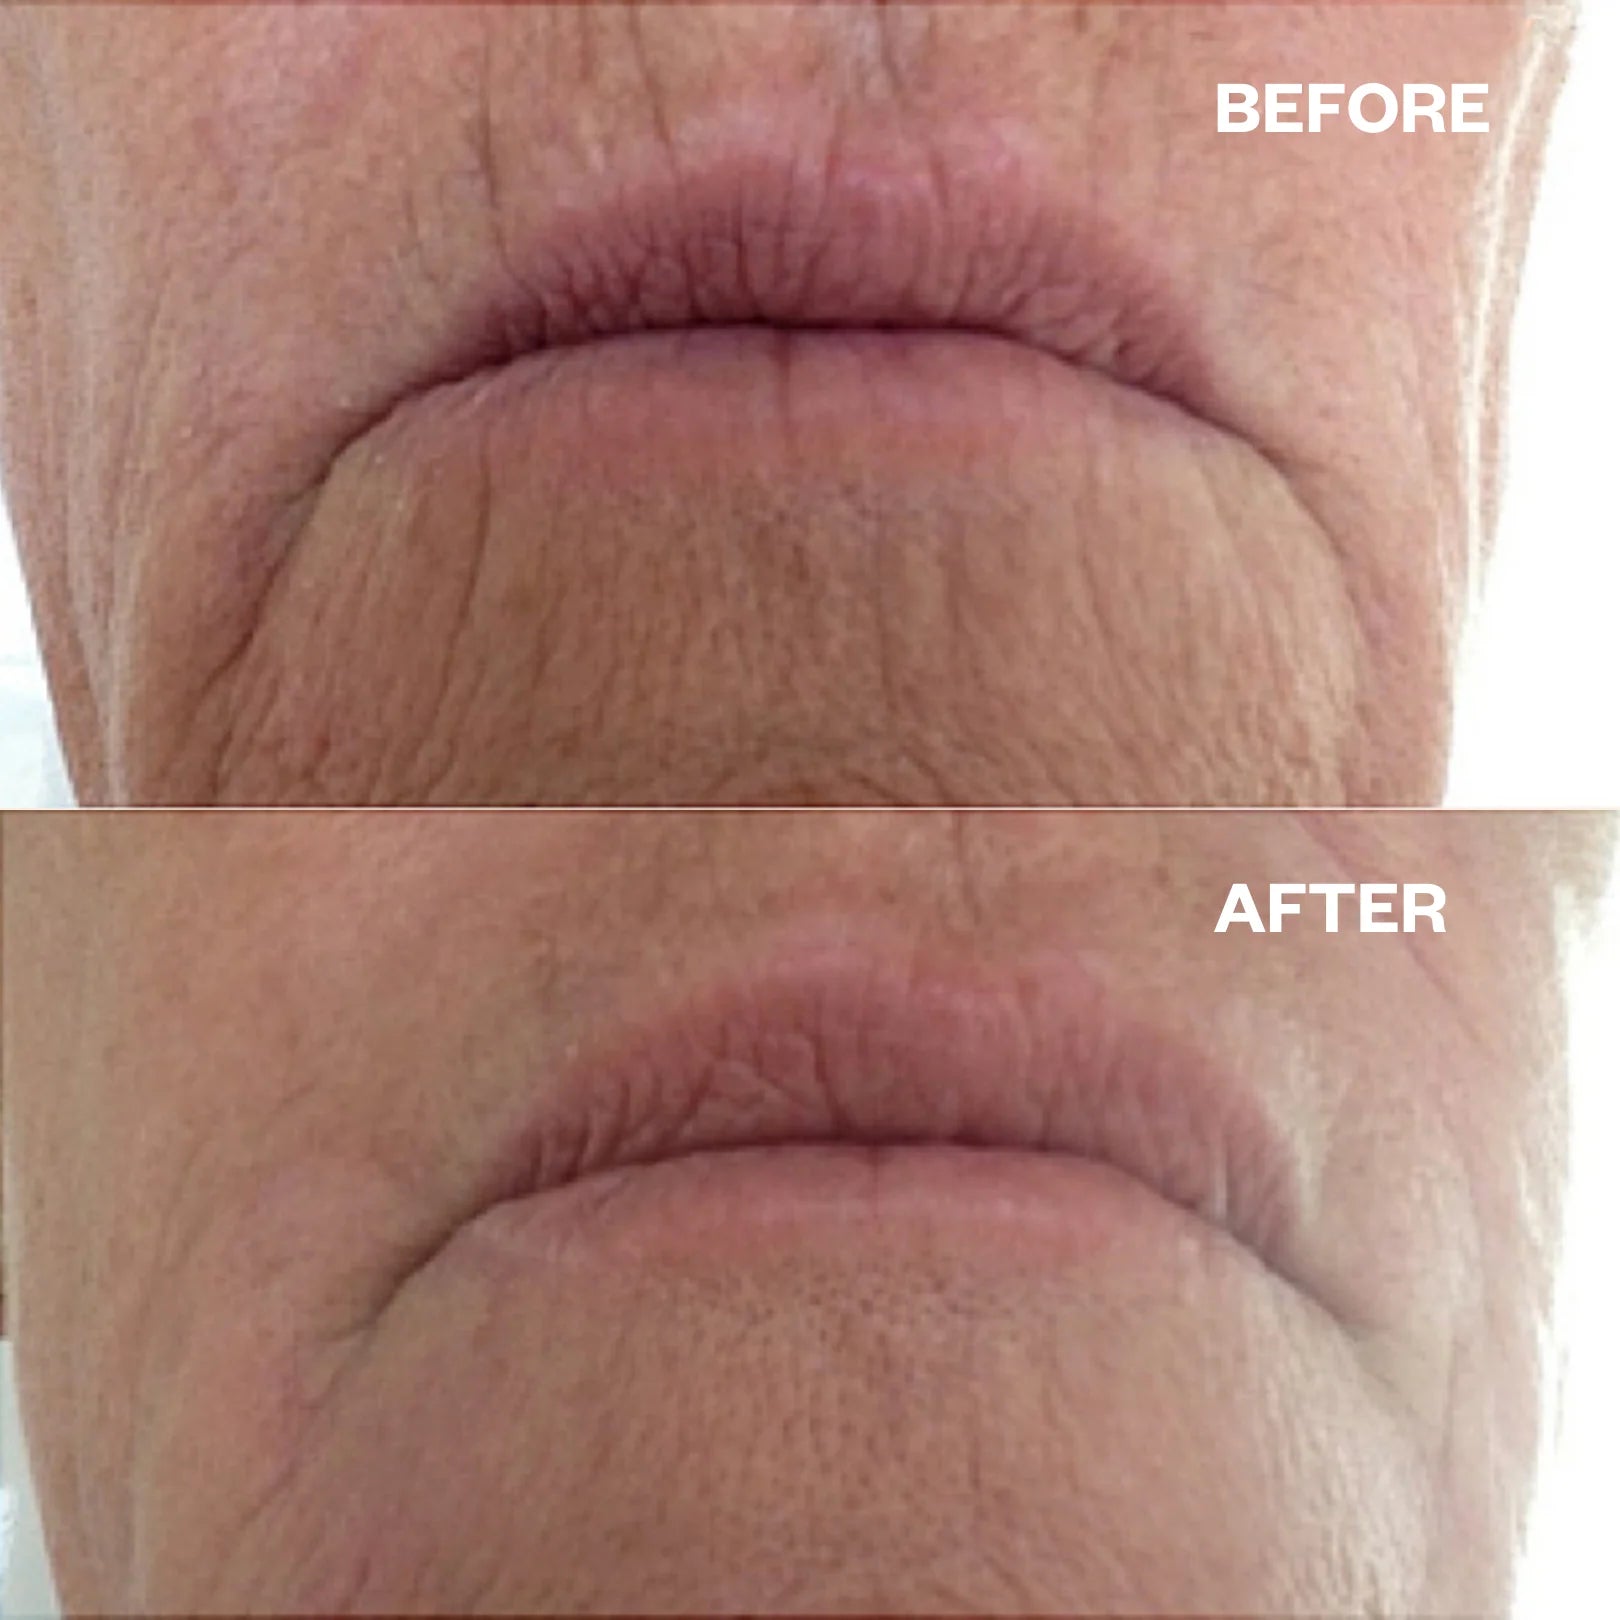 Wrinkles Schminkles Mouth & Lip Patches